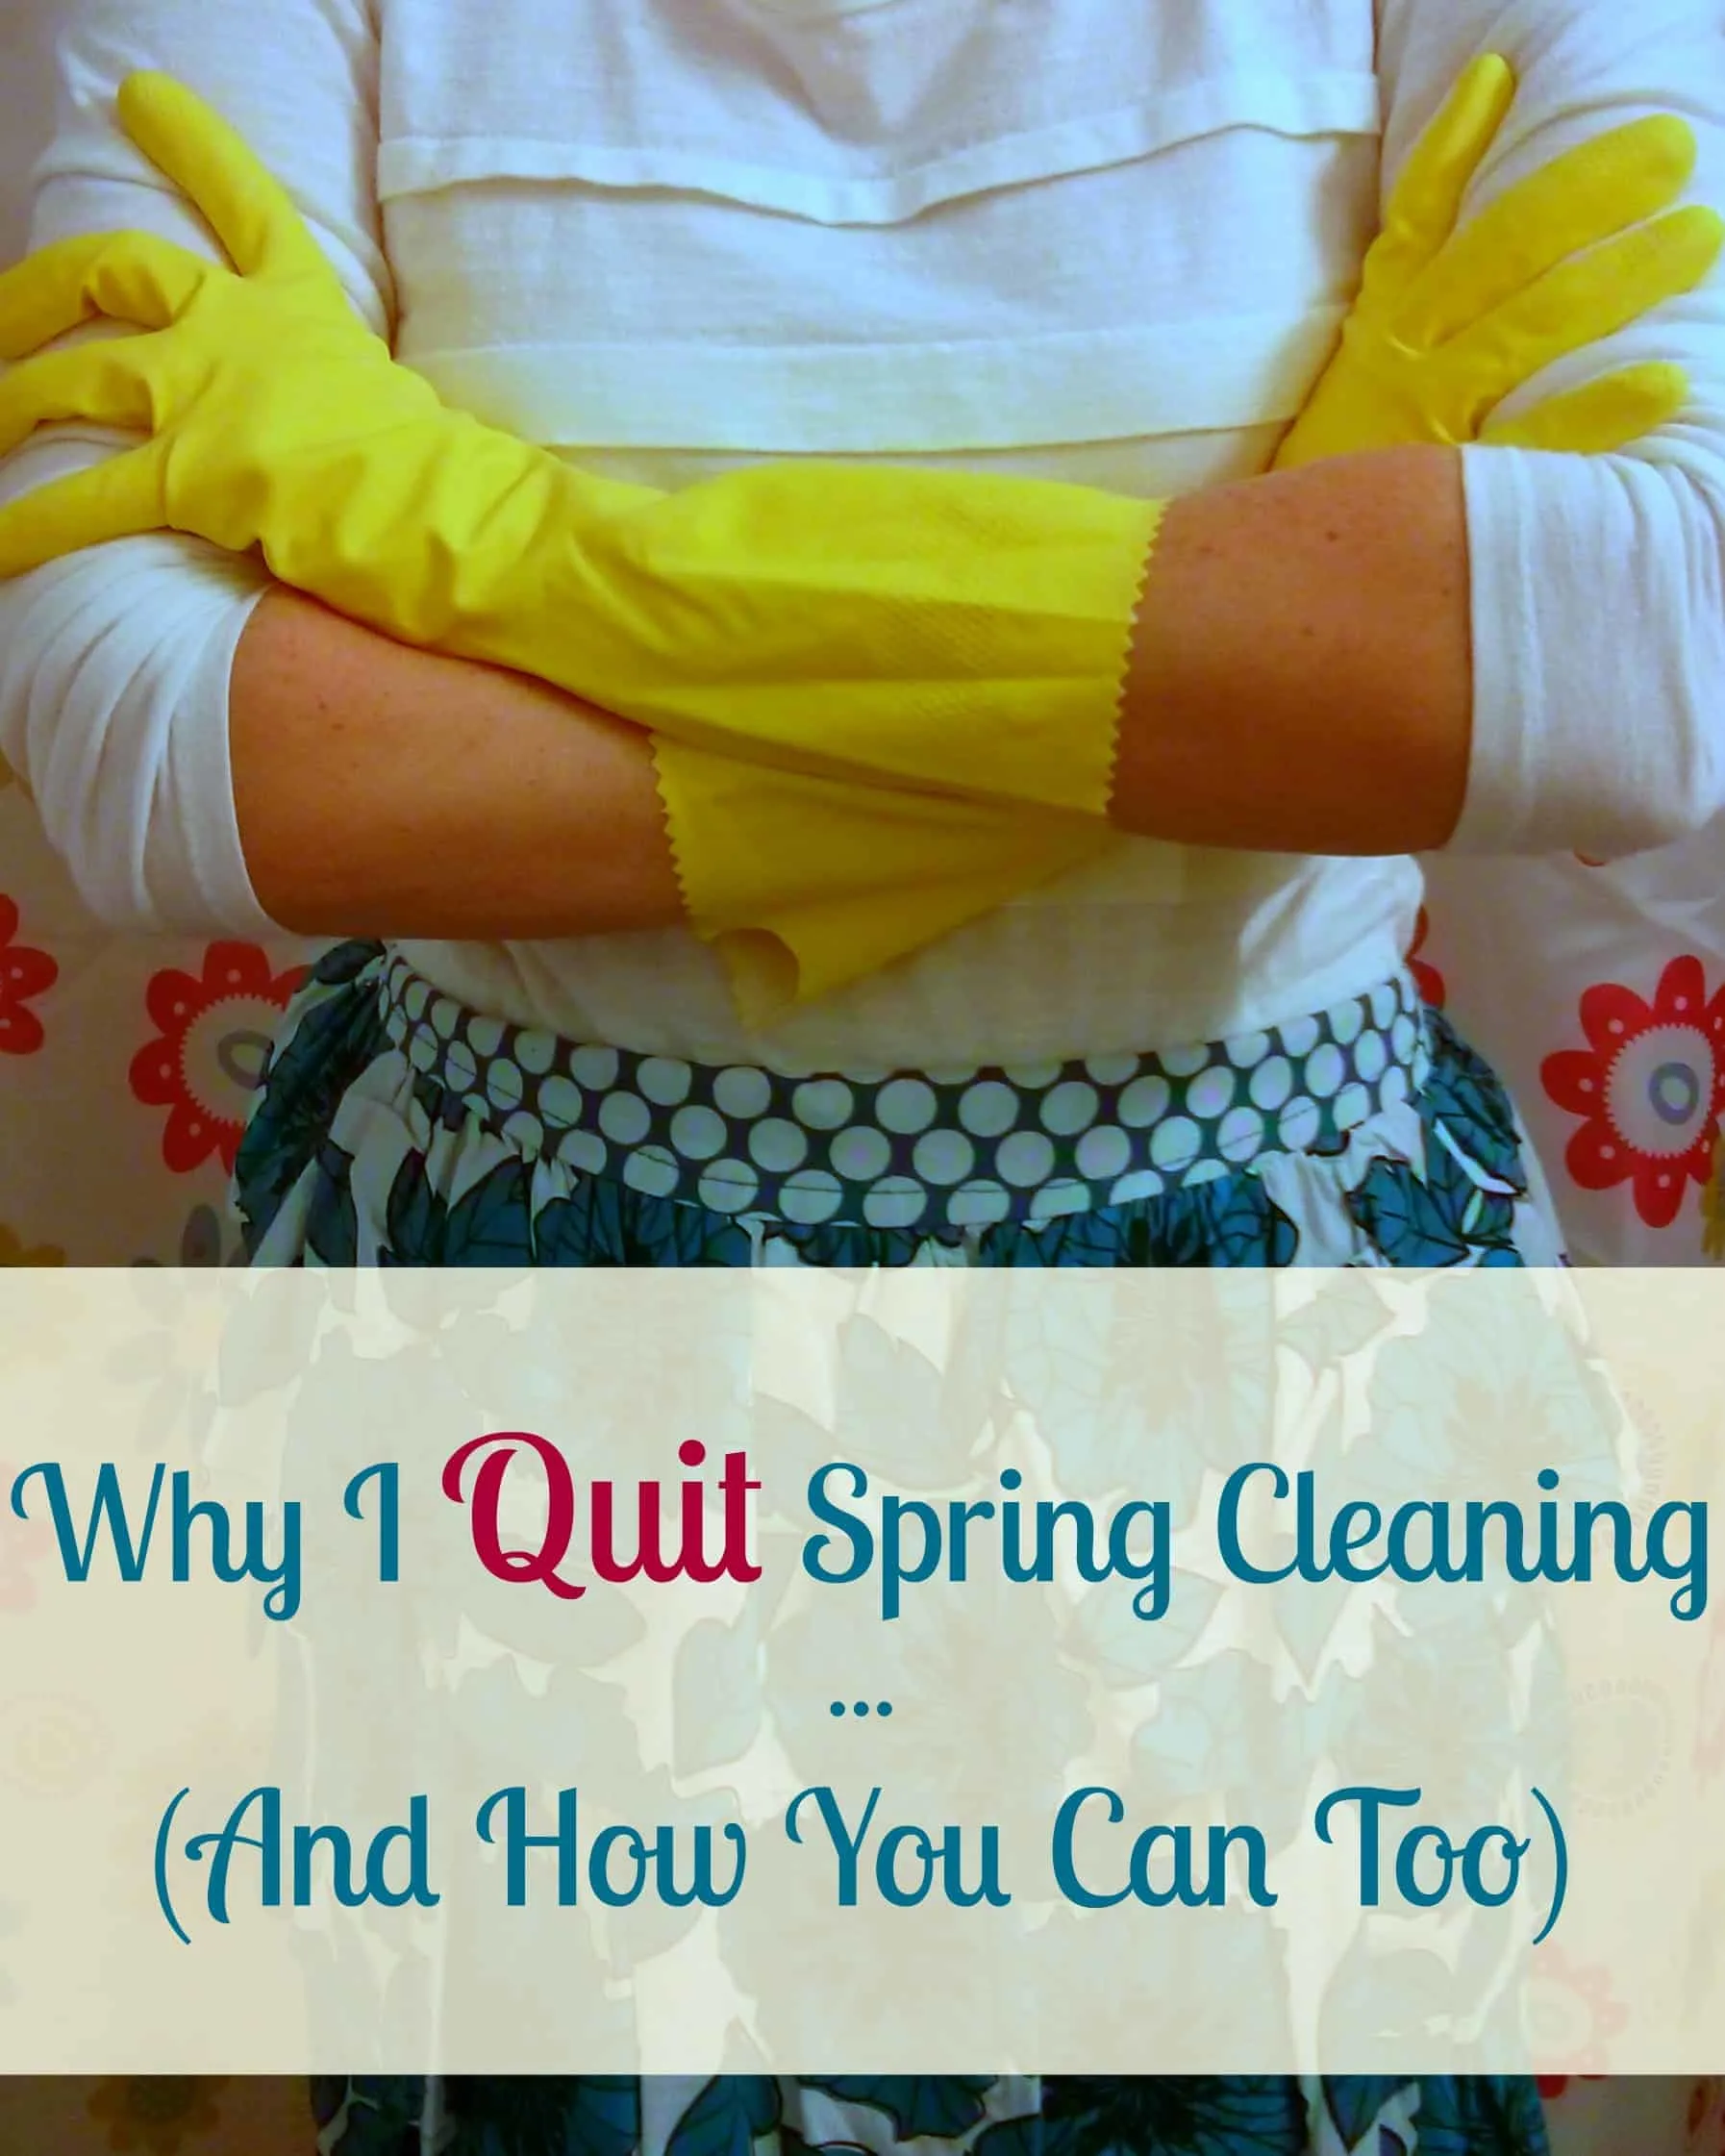 Why I Quit Spring Cleaning, and How You Can Too